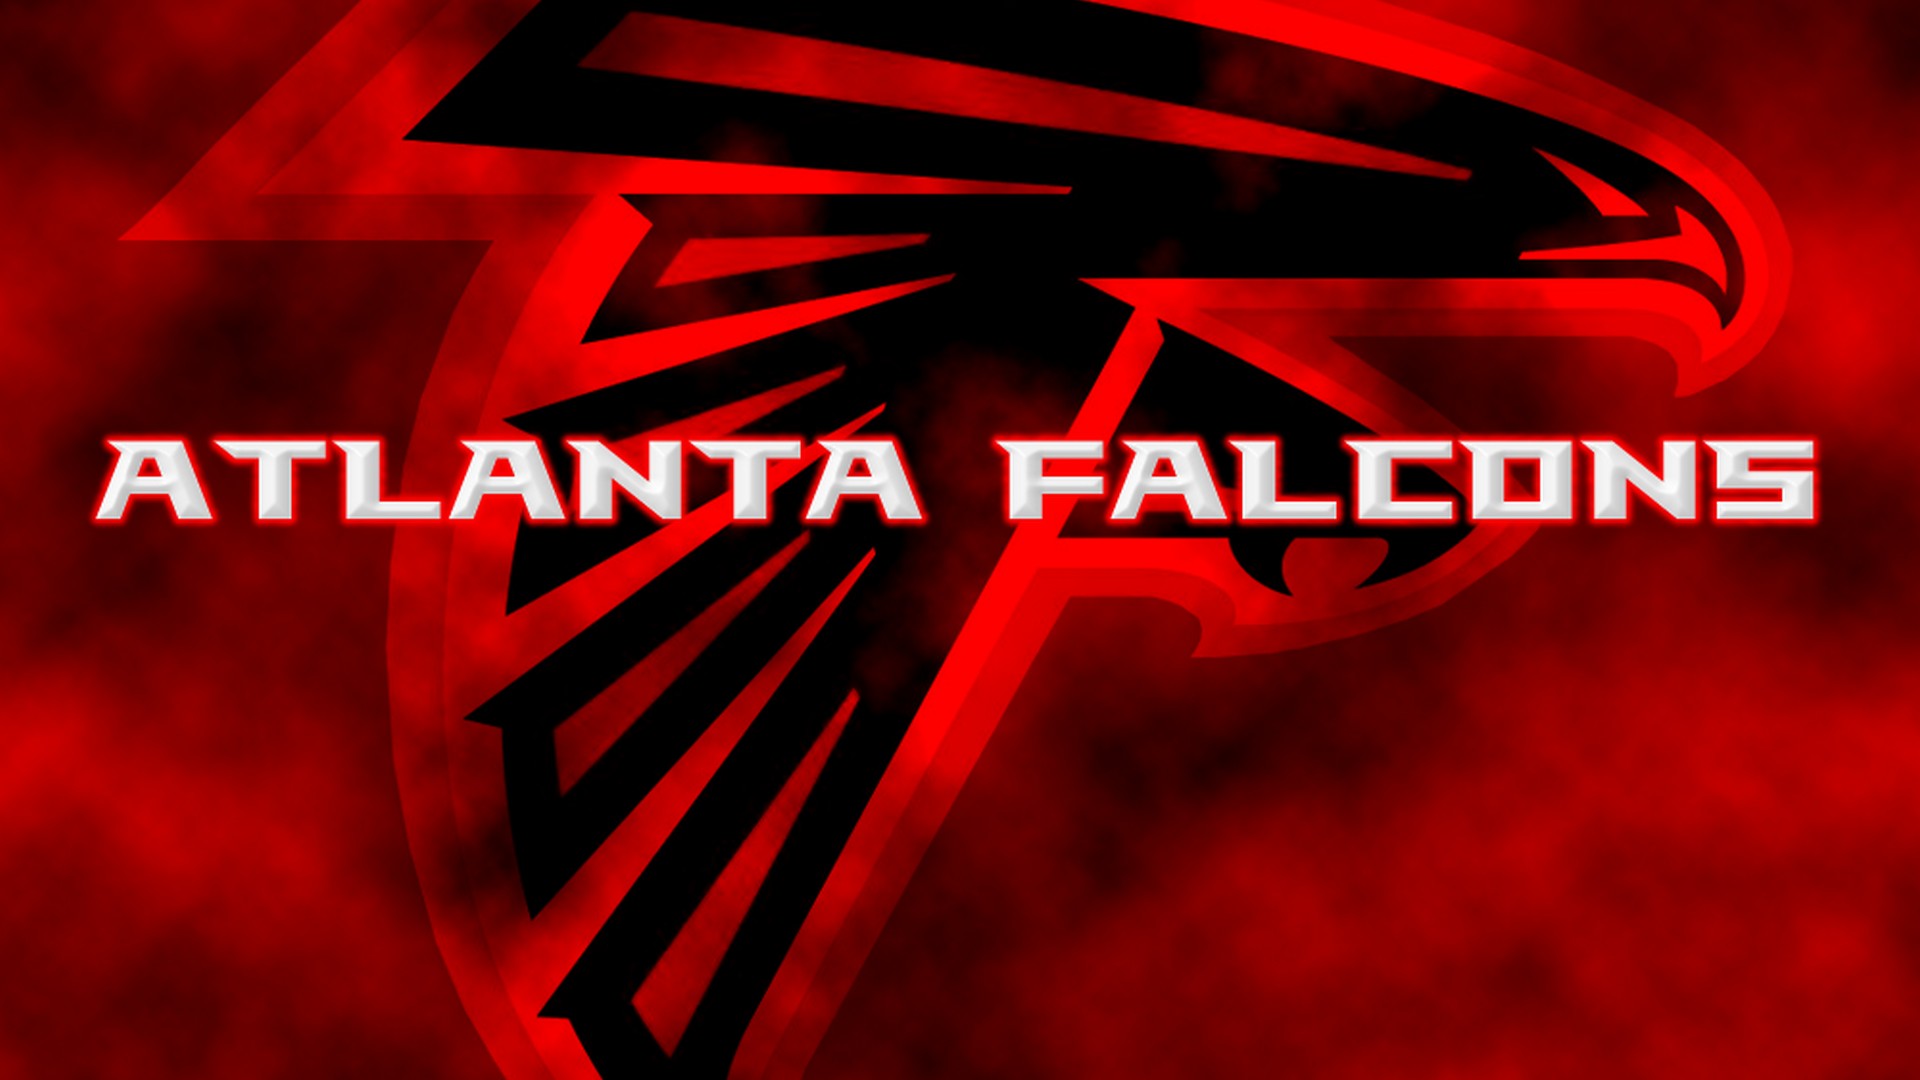 Atlanta Falcons For Mac With Resolution 1920X1080